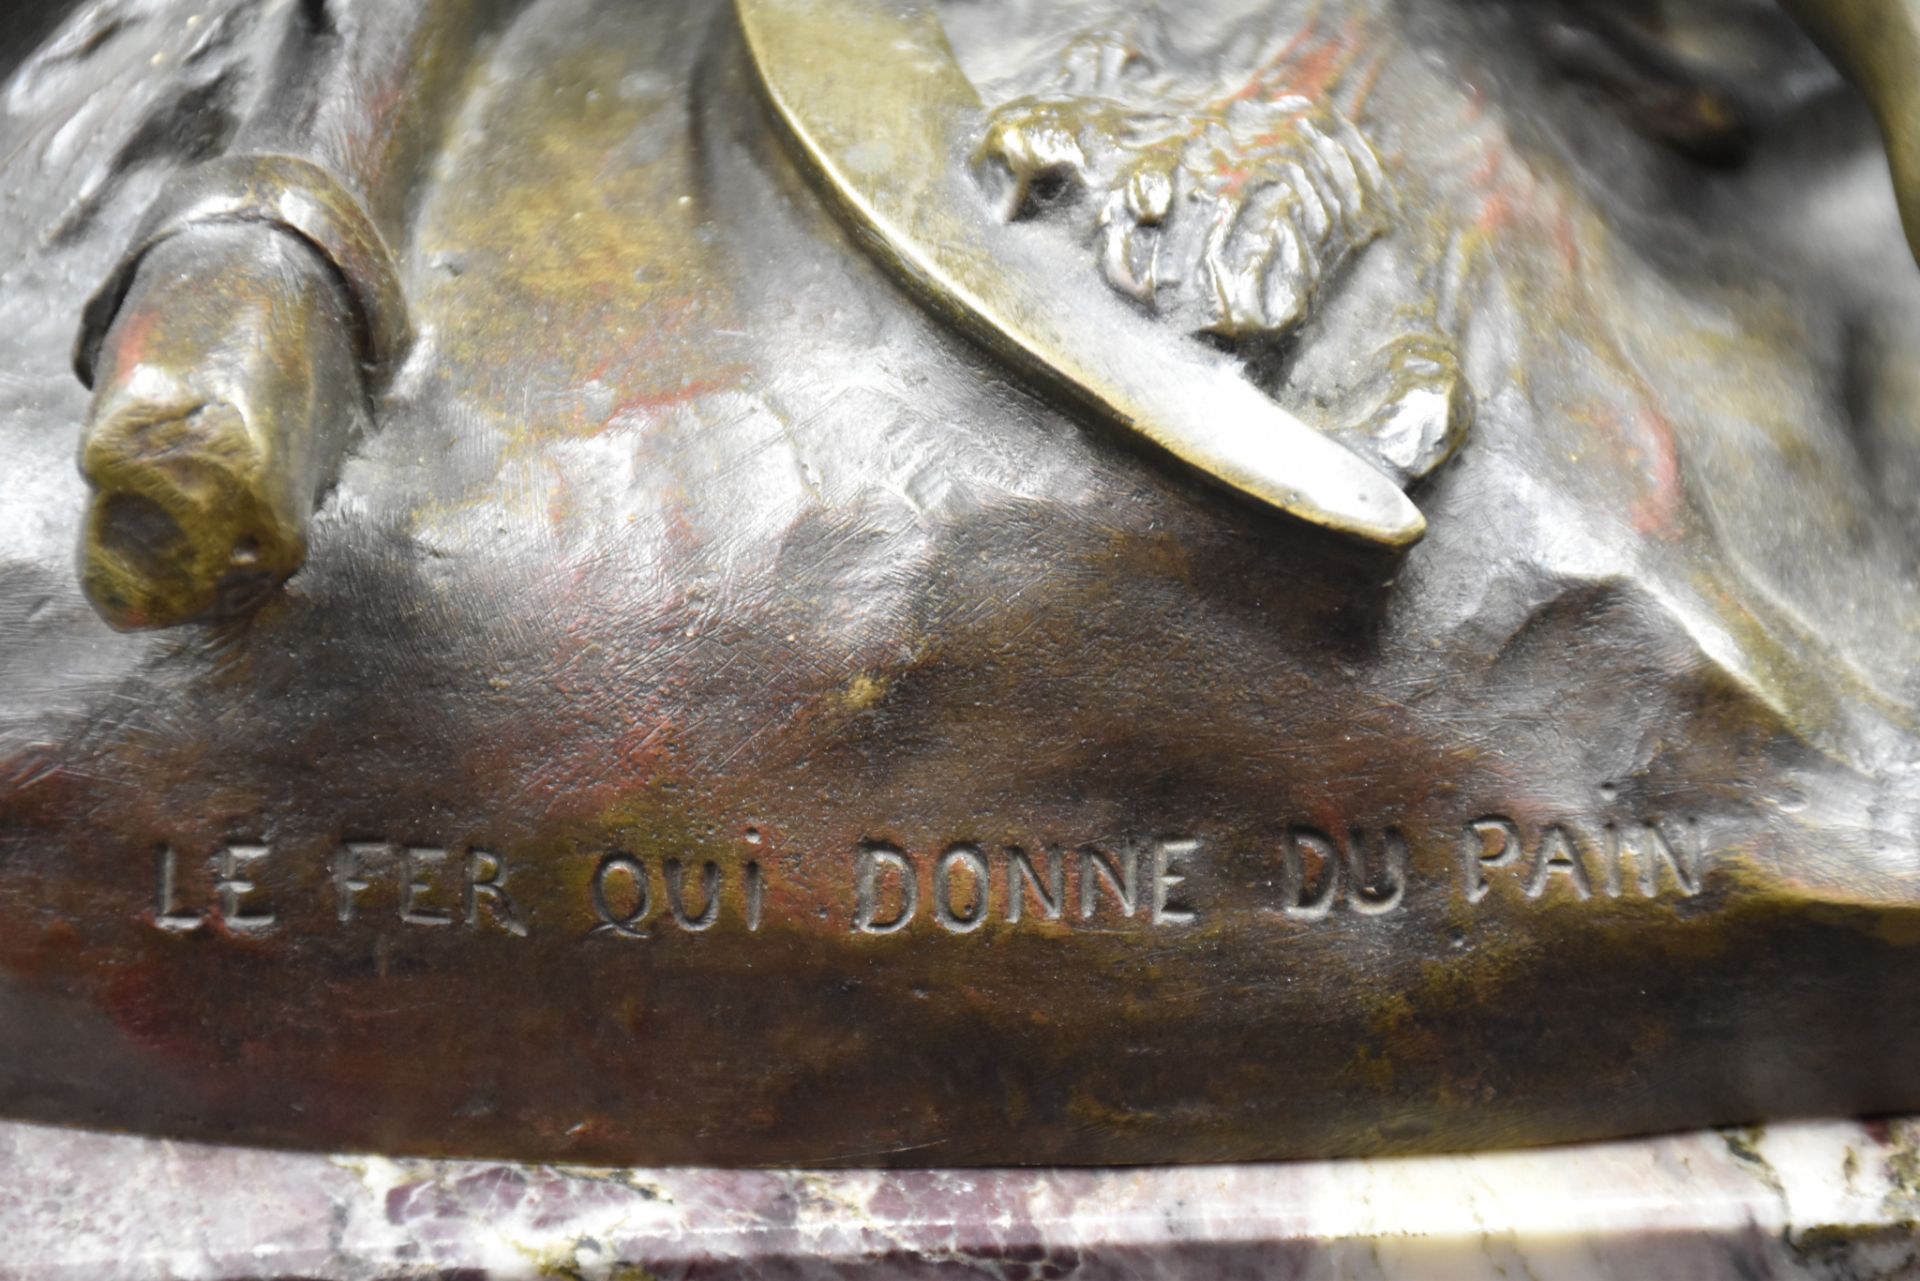 Jean Jules Antoine LECOMTE DU NOUY. "The iron that gives bread. Bronze with brown patina on a veined - Image 5 of 5